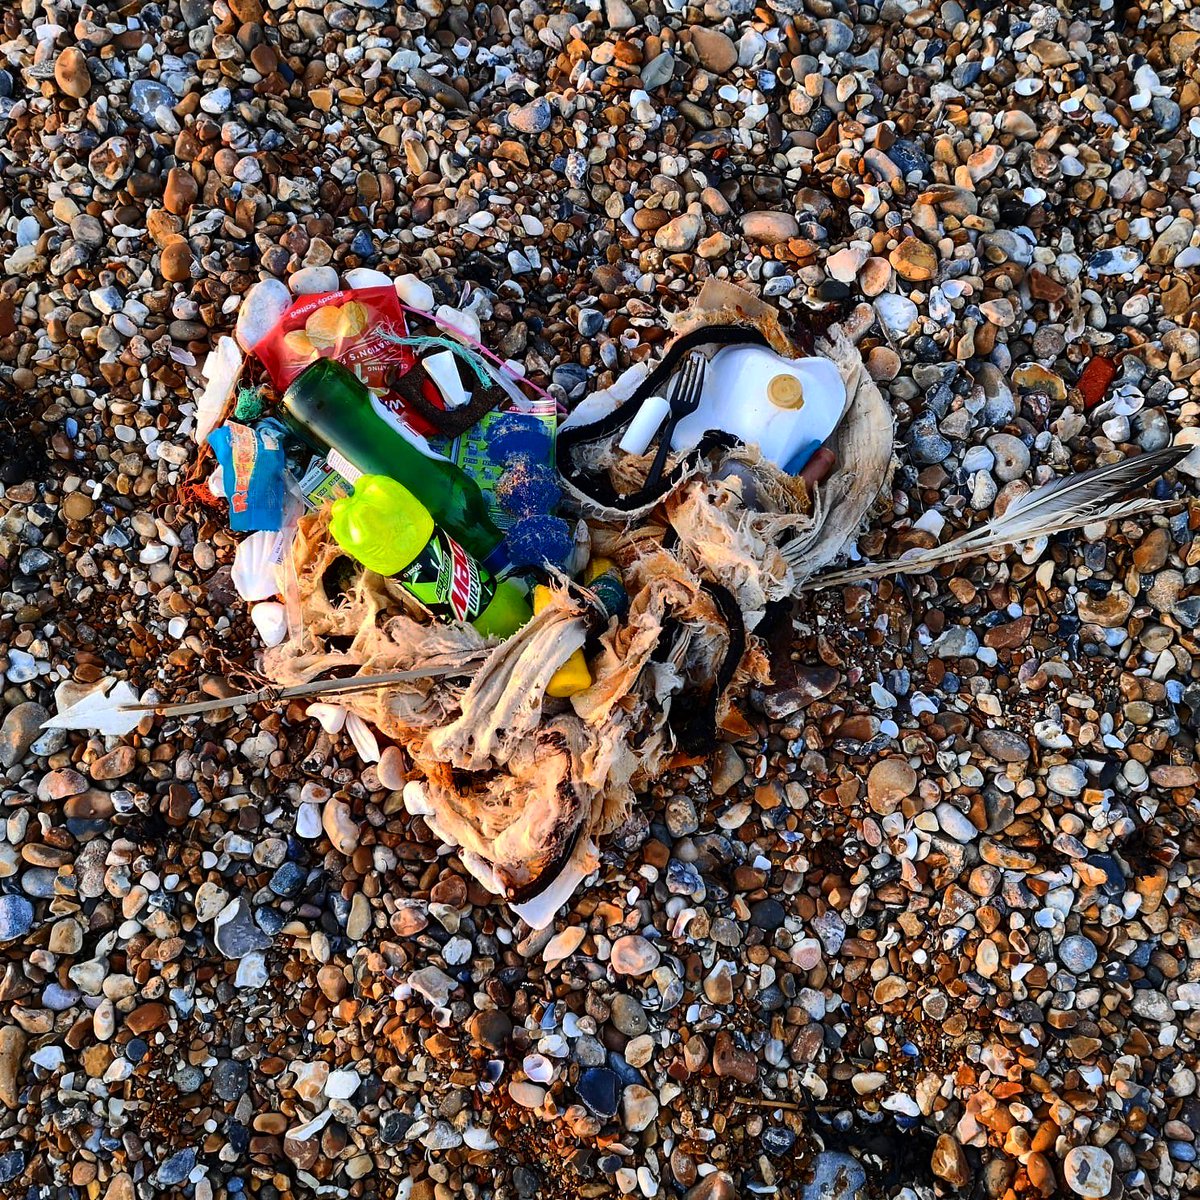 #ShowYourBeachSomeLove #cleanerseasproject #2minutebeachclean